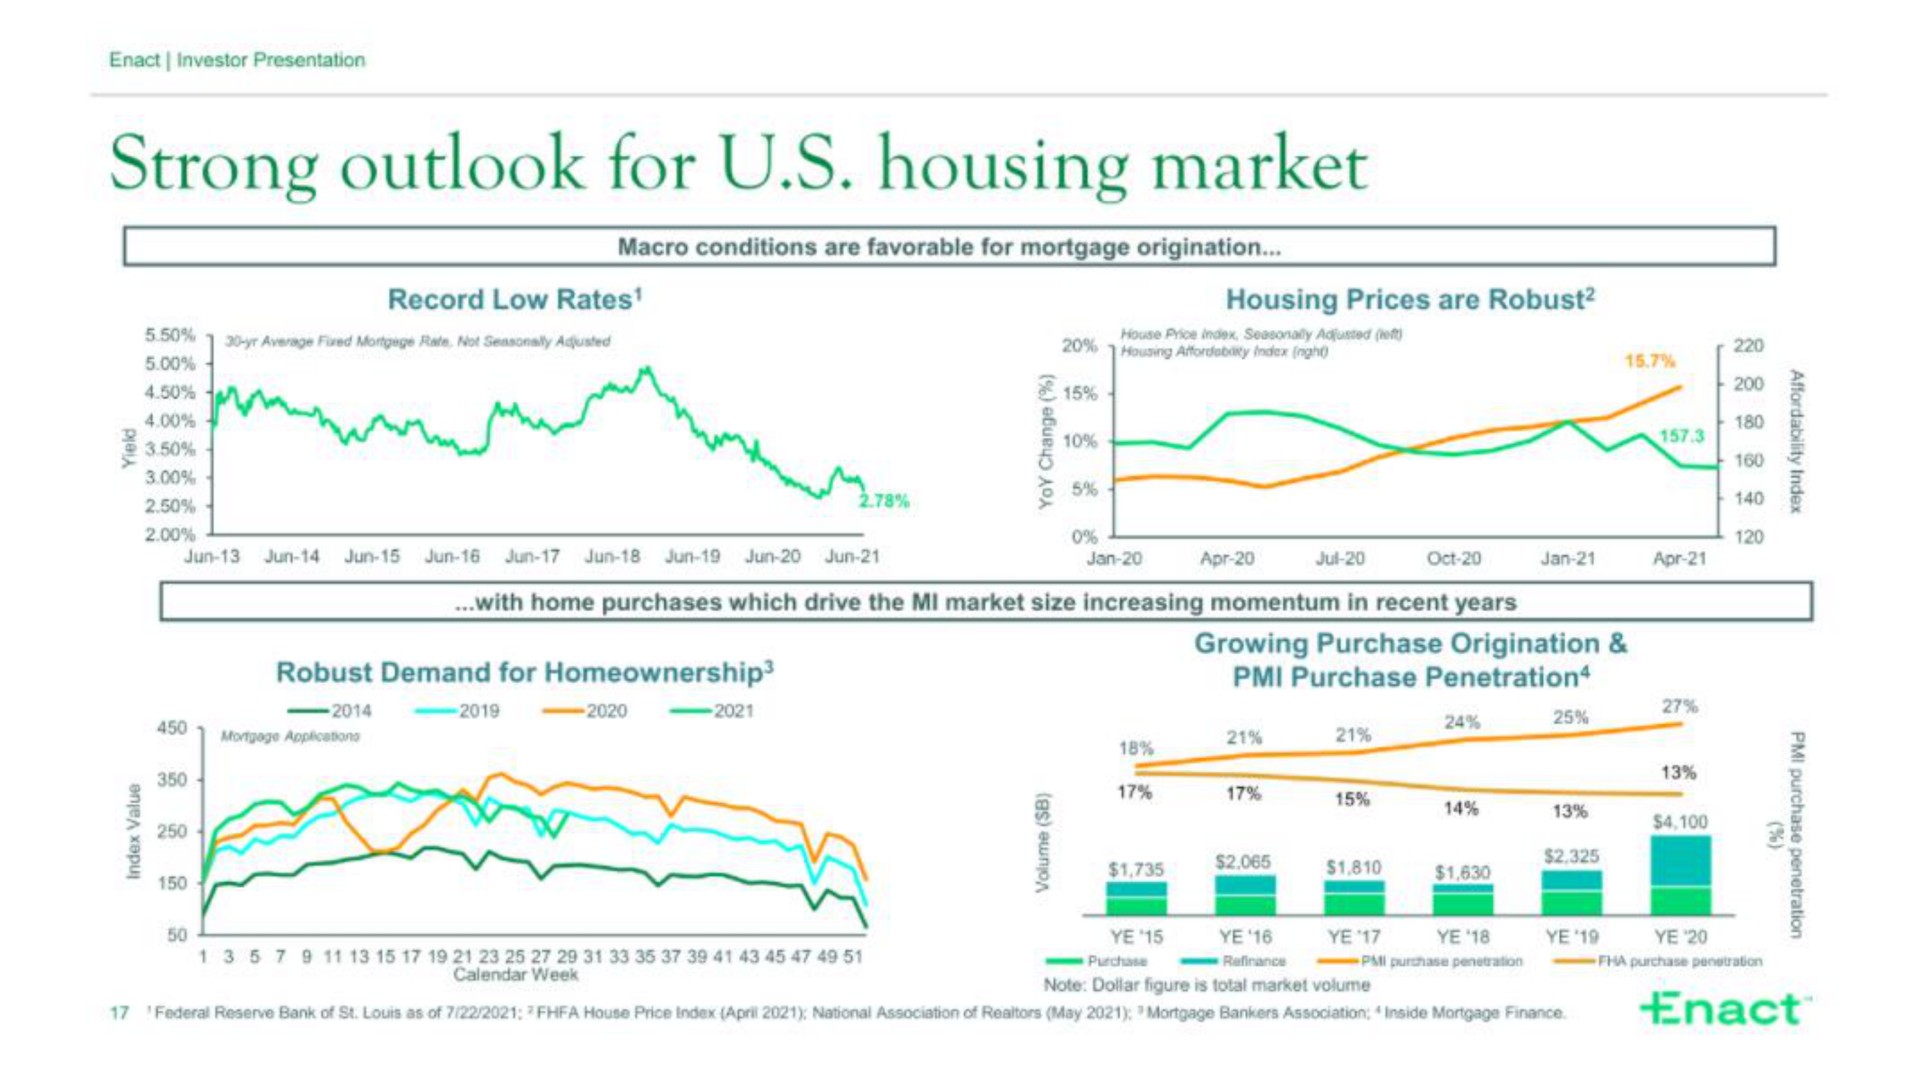 strong outlook for housing market | Enact